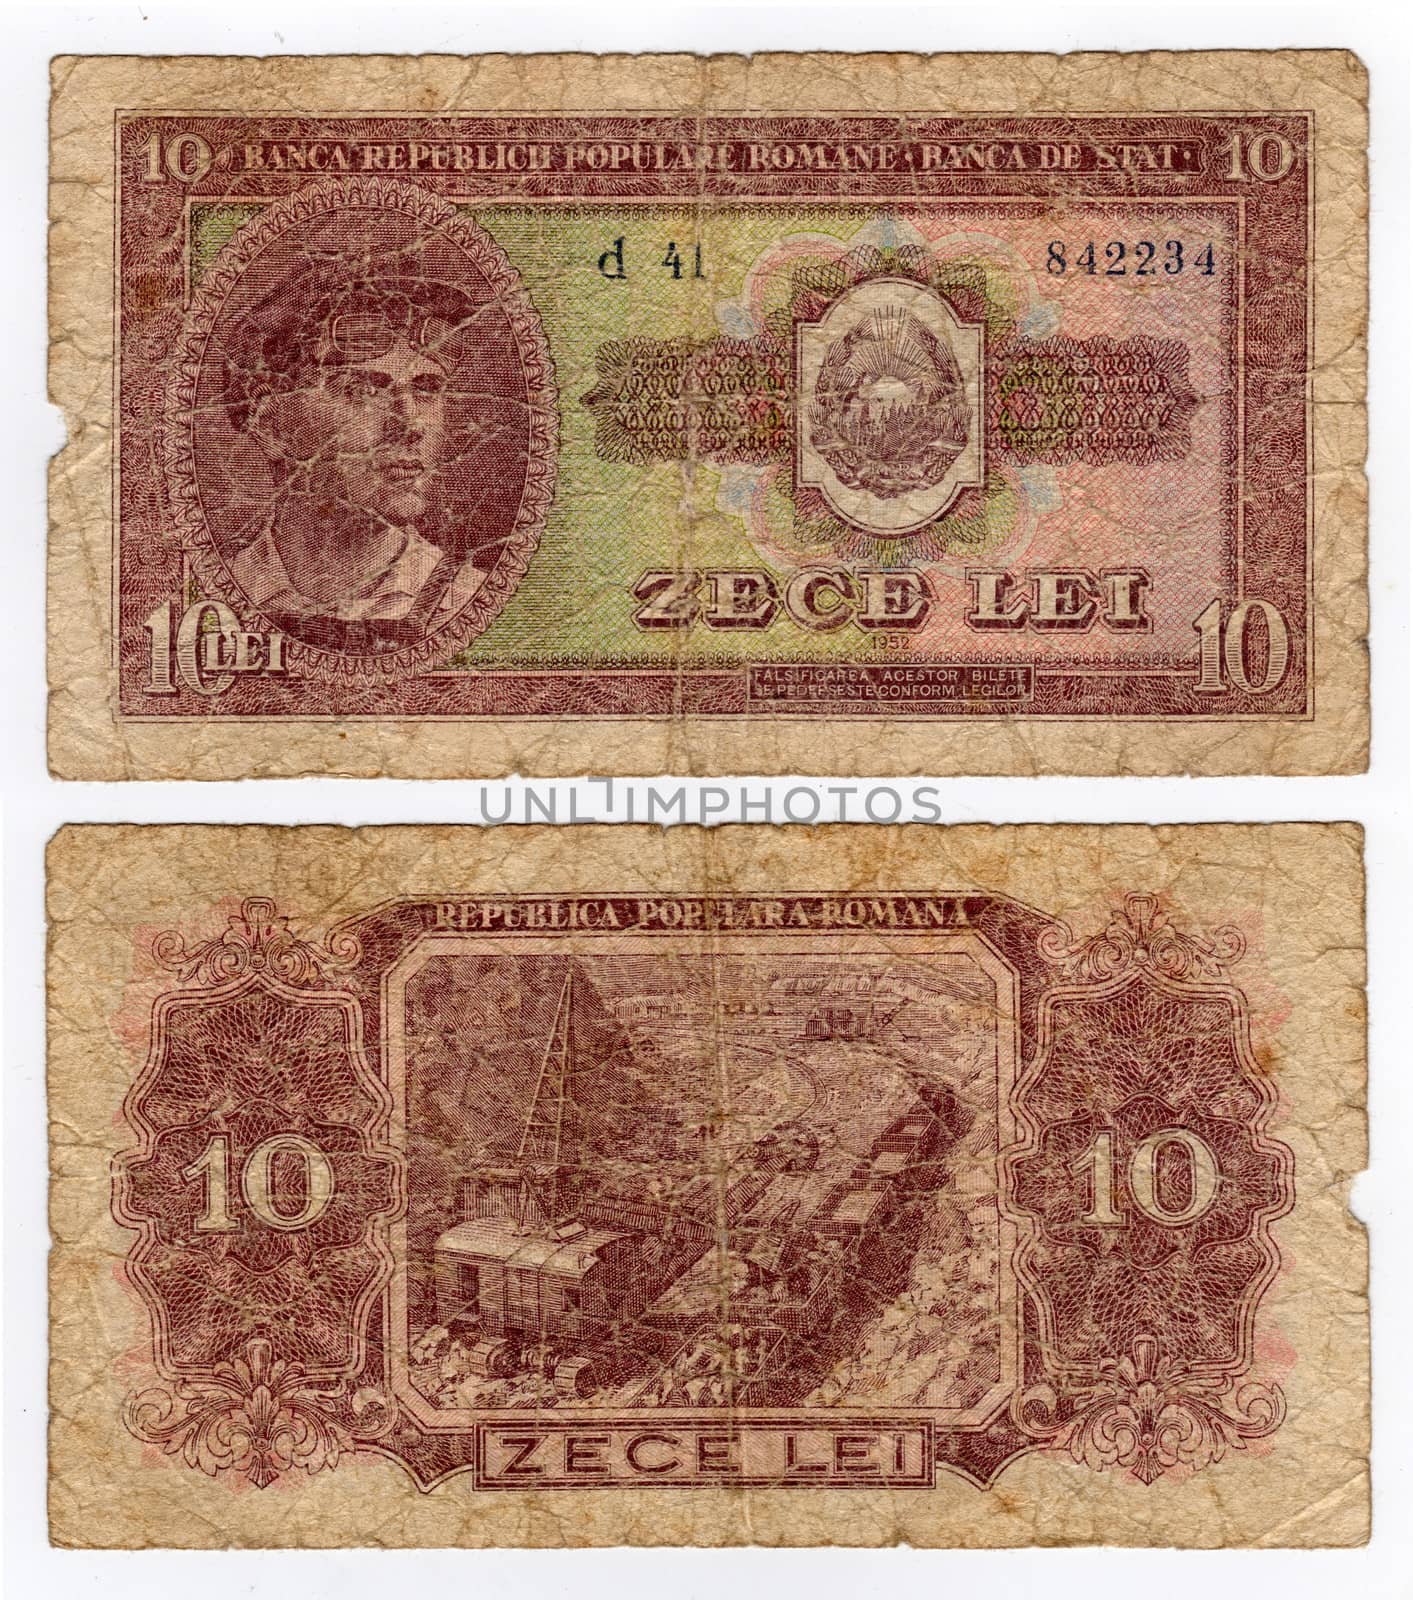 vintage romanian banknote from 1952 by ojal